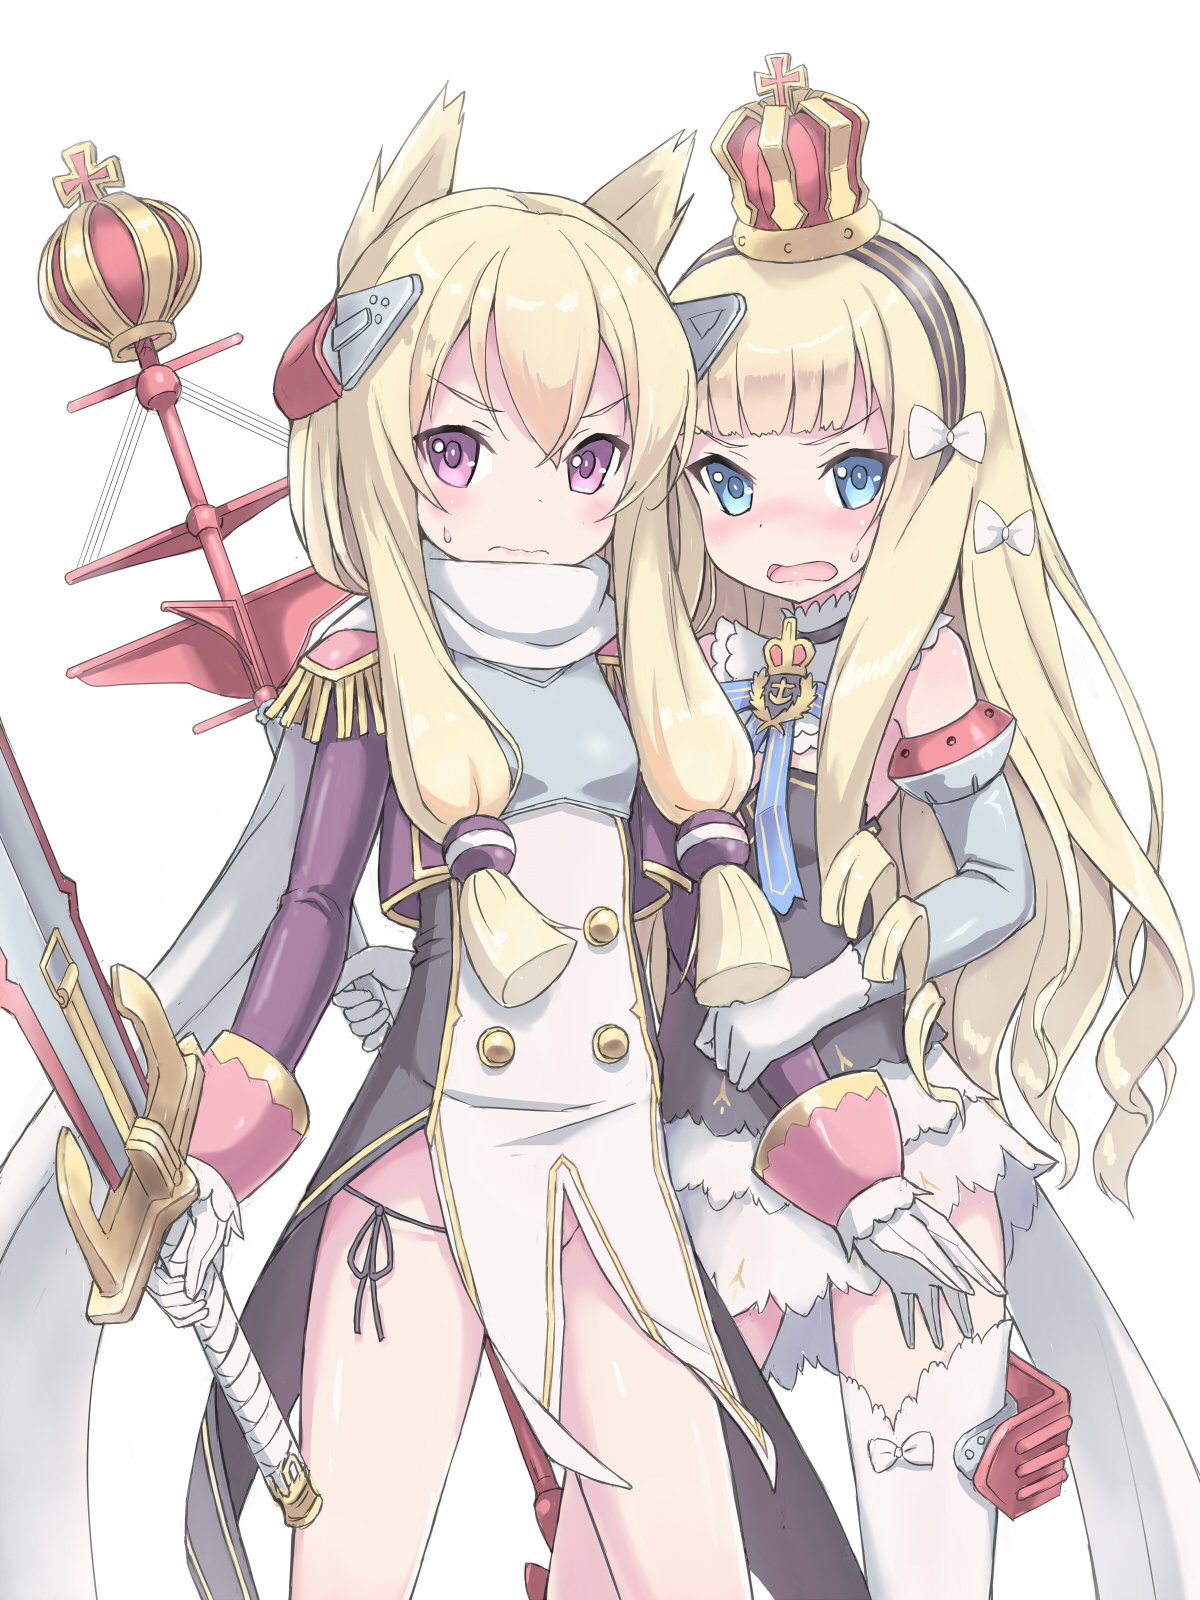 2girls azur_lane black_panties blonde_hair blue_eyes bow character_request commentary_request crown detached_sleeves eyebrows_visible_through_hair gloves hair_bow hairband highres holding holding_weapon kimagure_blue long_hair long_sleeves looking_at_viewer multiple_girls panties queen_elizabeth_(azur_lane) simple_background sweatdrop thigh-highs underwear violet_eyes weapon white_background white_gloves white_legwear